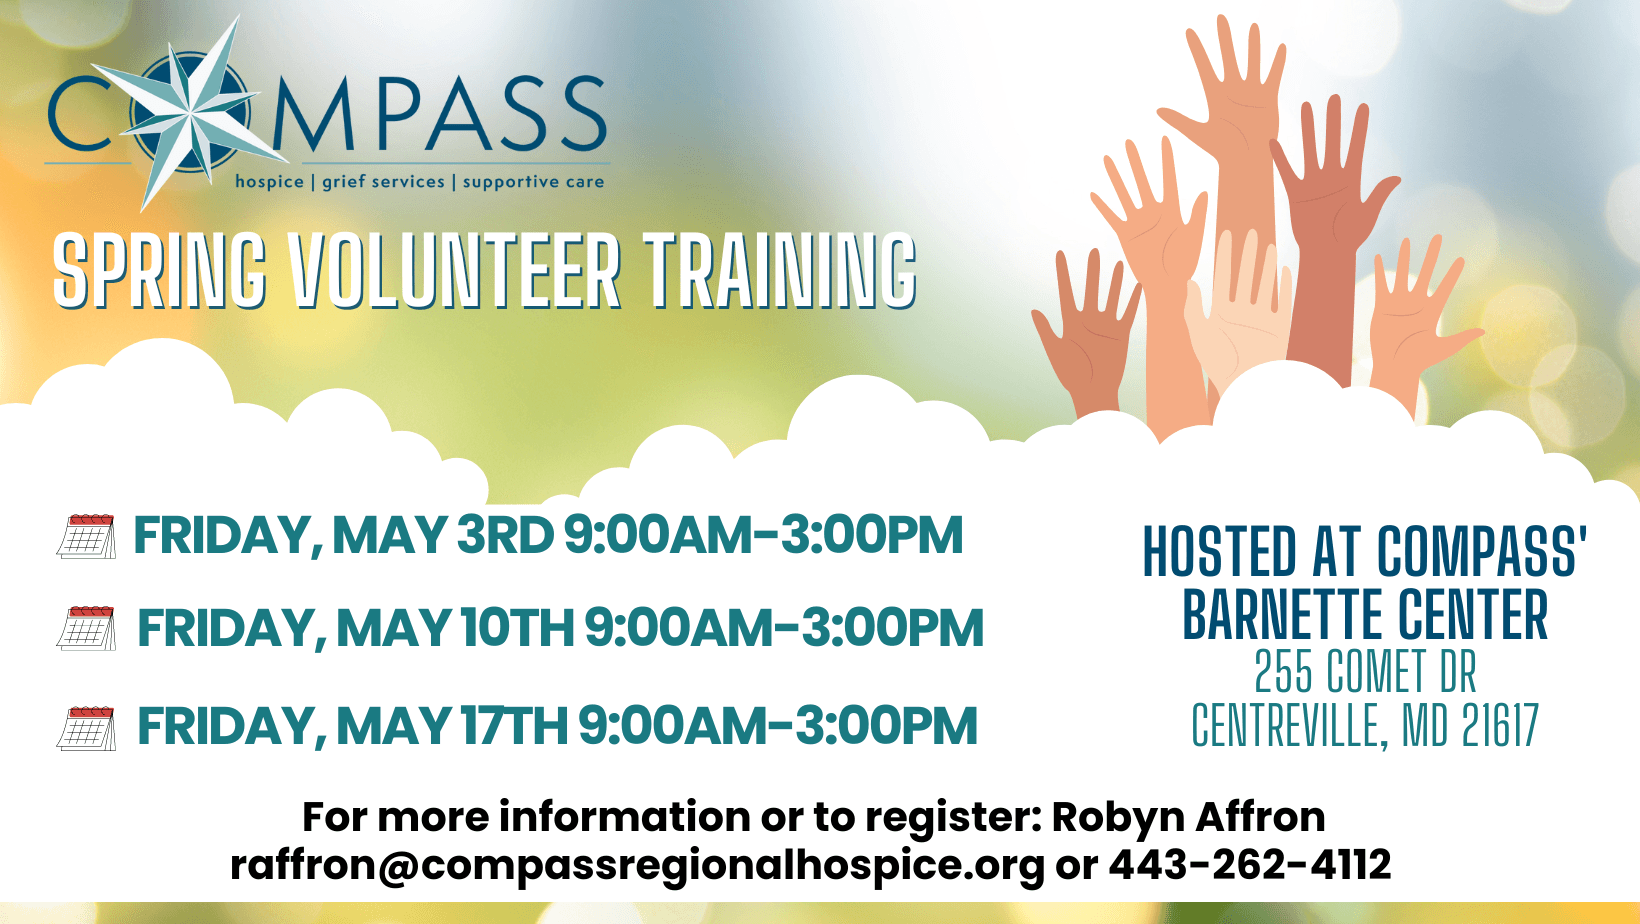 Compass is hosting spring volunteer training on May 3, 10, & 17th from 9:00am-3:00pm at their Barnette Center Conference Room at 255 Comet Dr. Centreville, MD 21617.